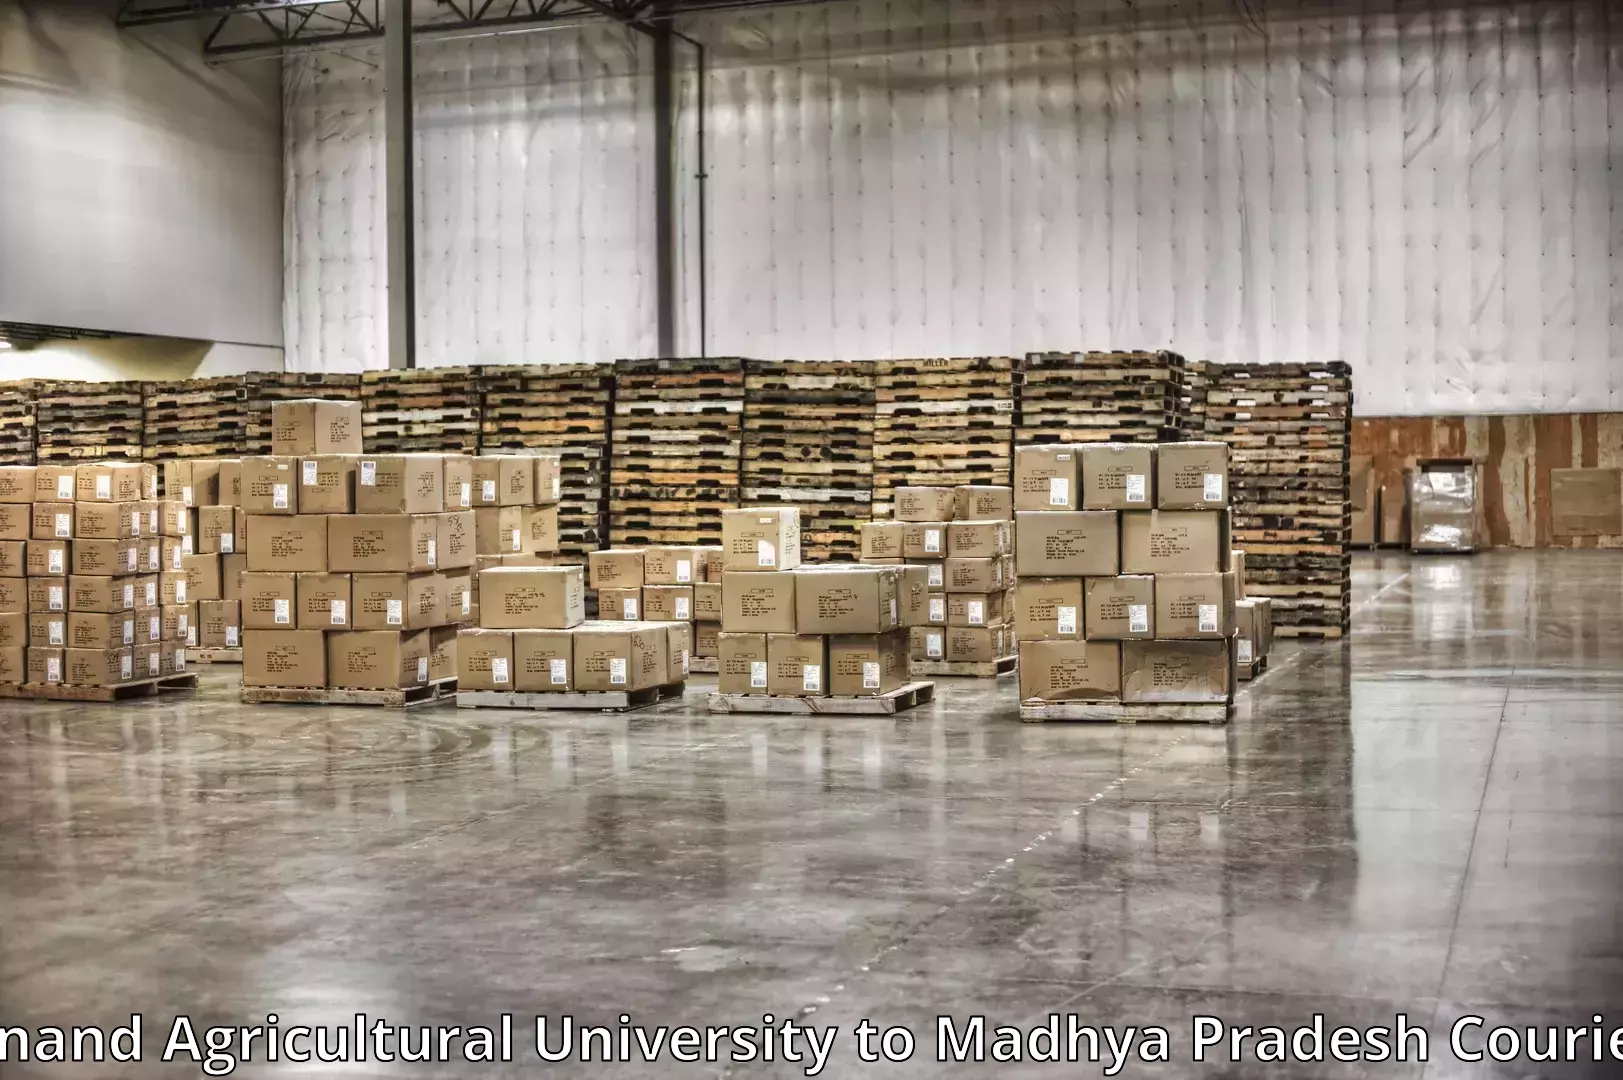 Furniture transport professionals Anand Agricultural University to Udaipura